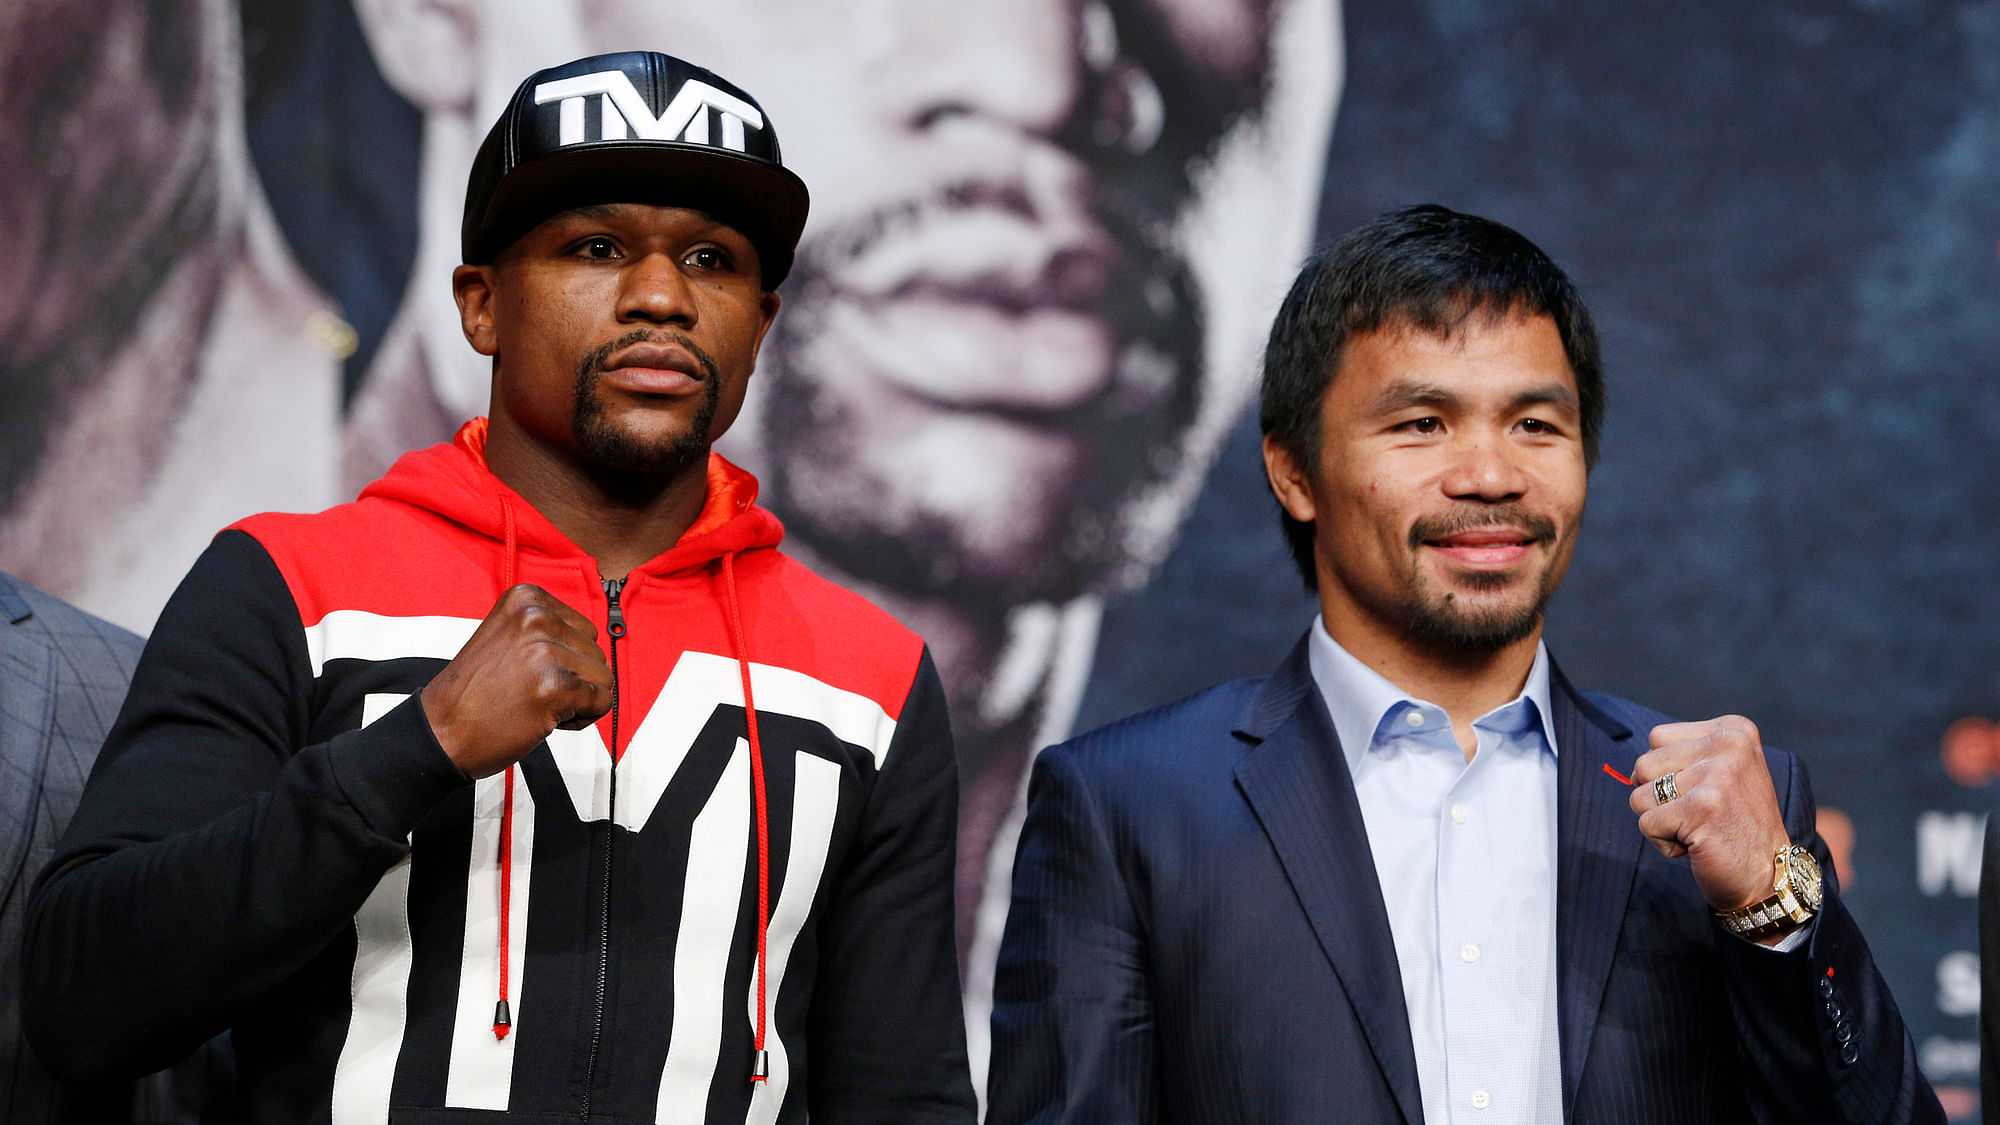 Manny with Floyd Mayweather Jr. before their pro boxing fight in Las Vegas in November 2015 (Photo: AP)